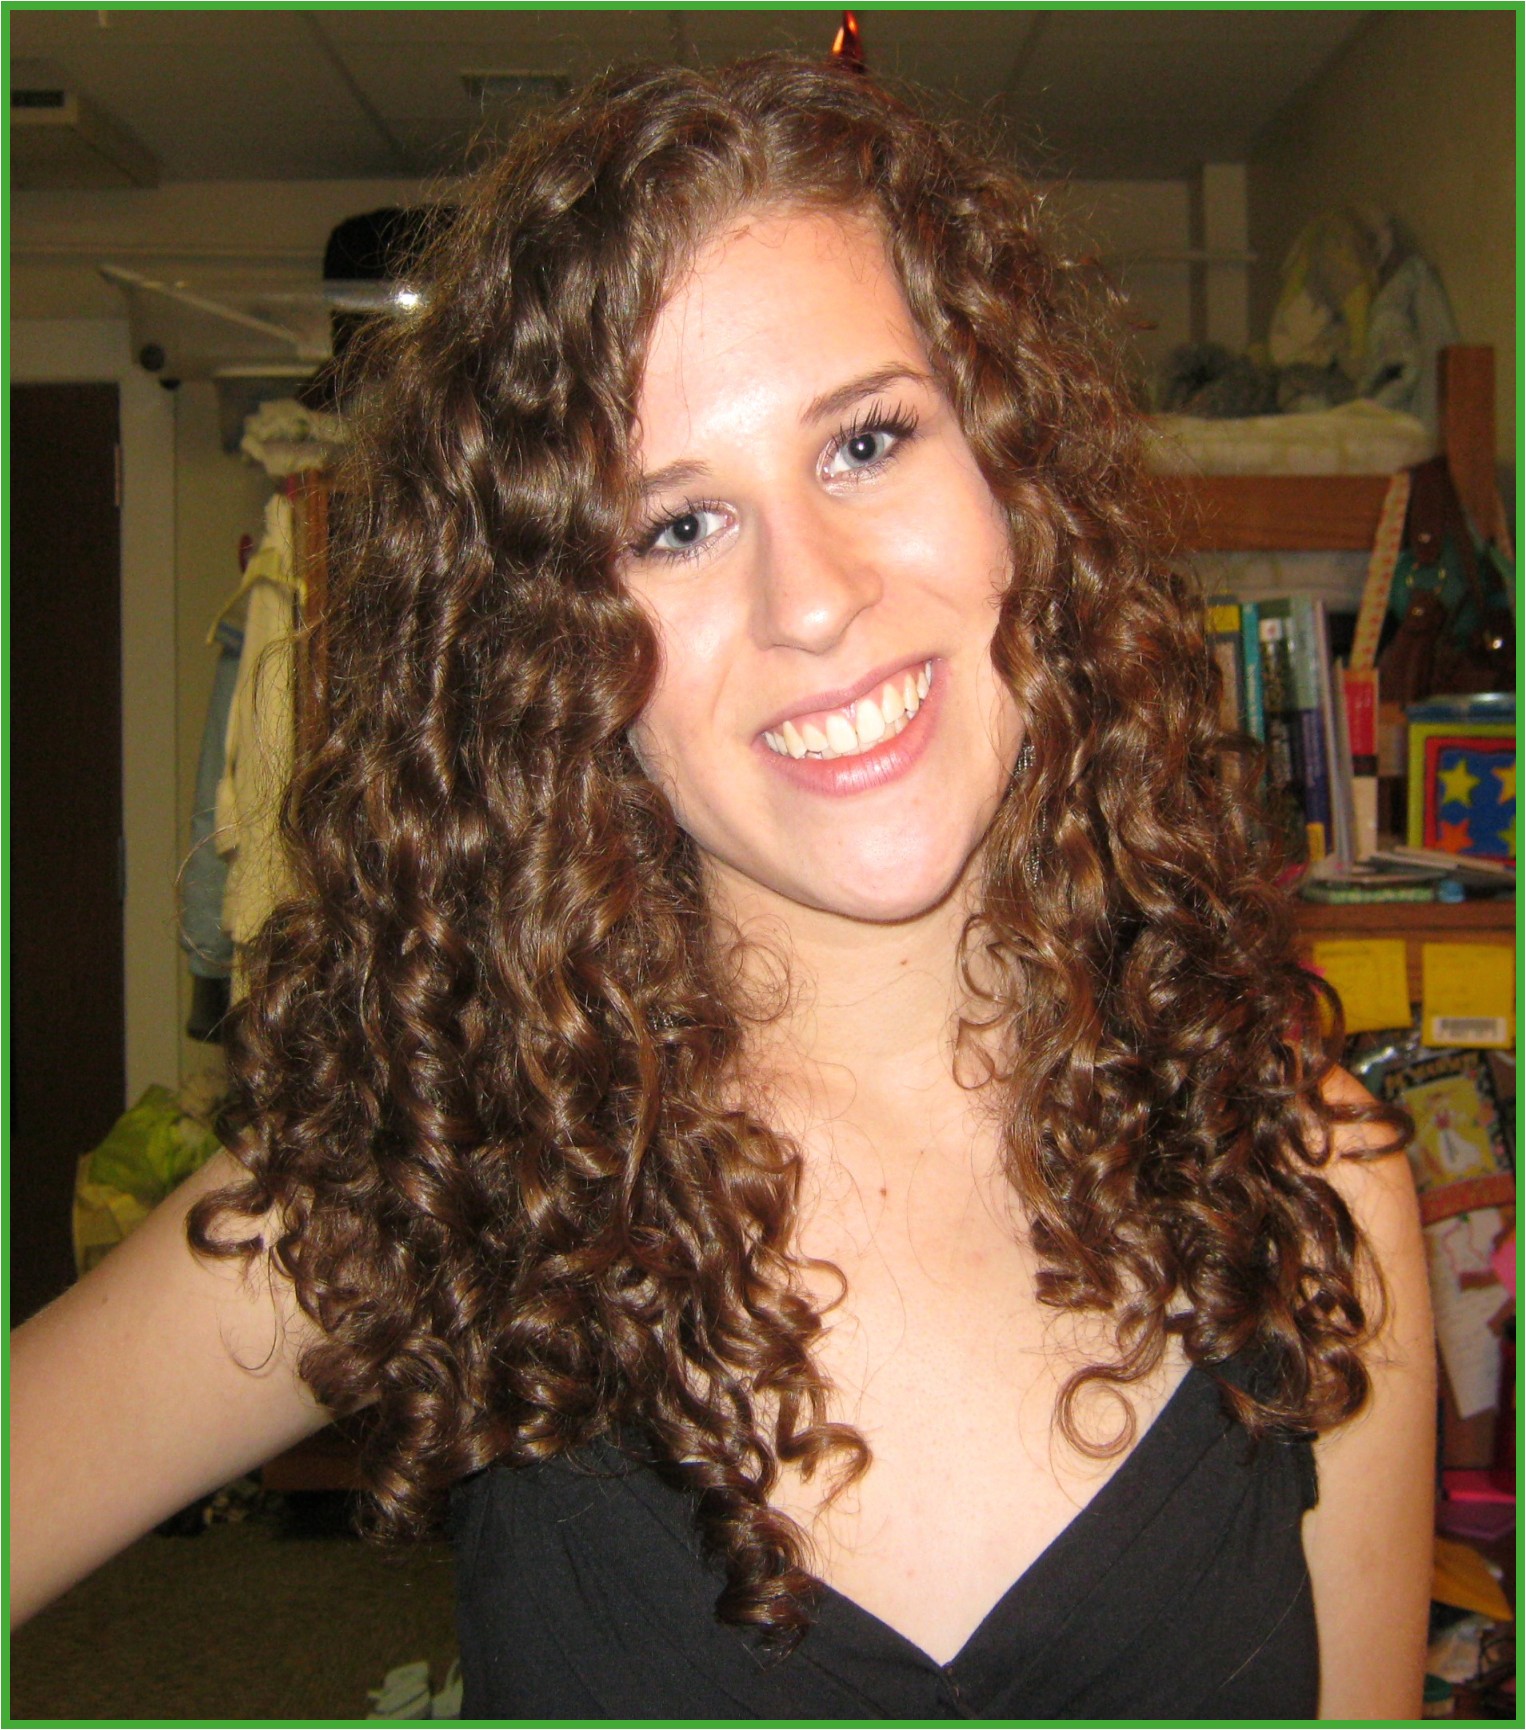 Pretty Hairstyles for Short Hair Inspirational Exciting Very Curly Hairstyles Fresh Curly Hair 0d Archives Hair